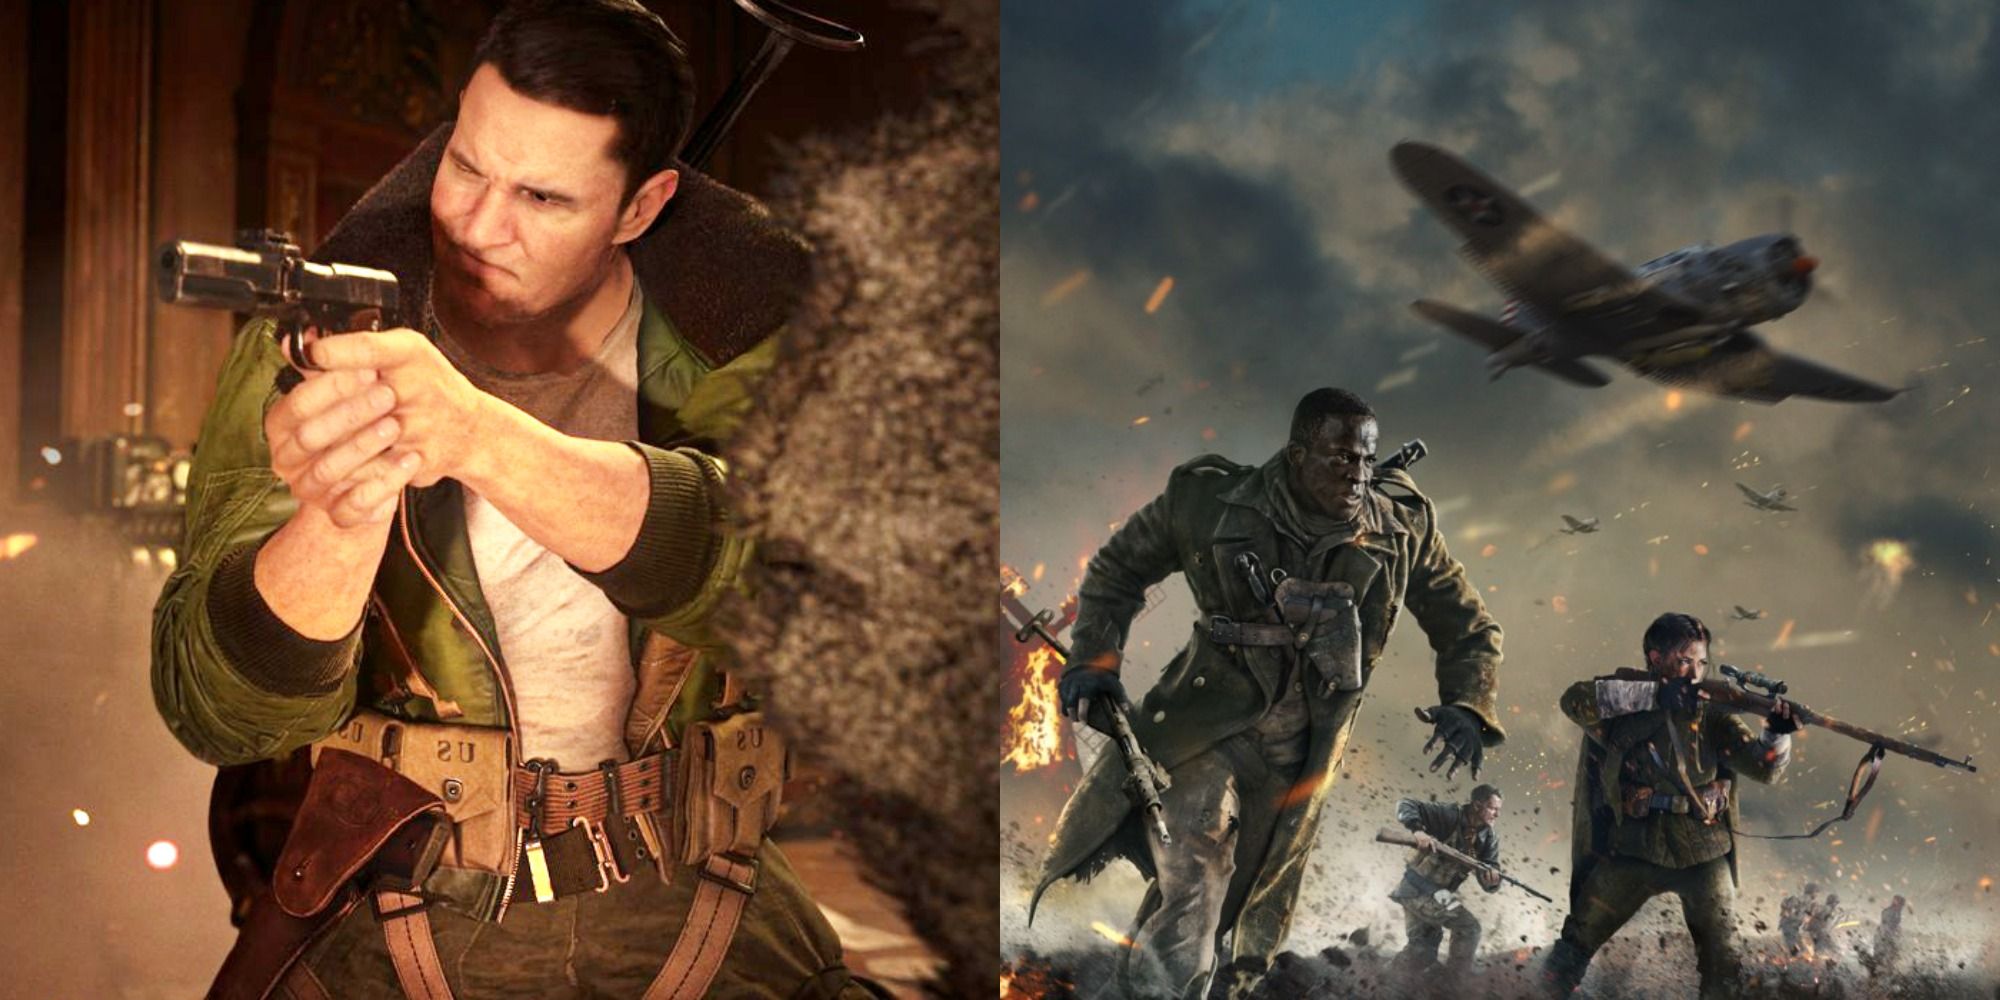 The Best Characters In Call Of Duty Vanguard Ranked By Likability